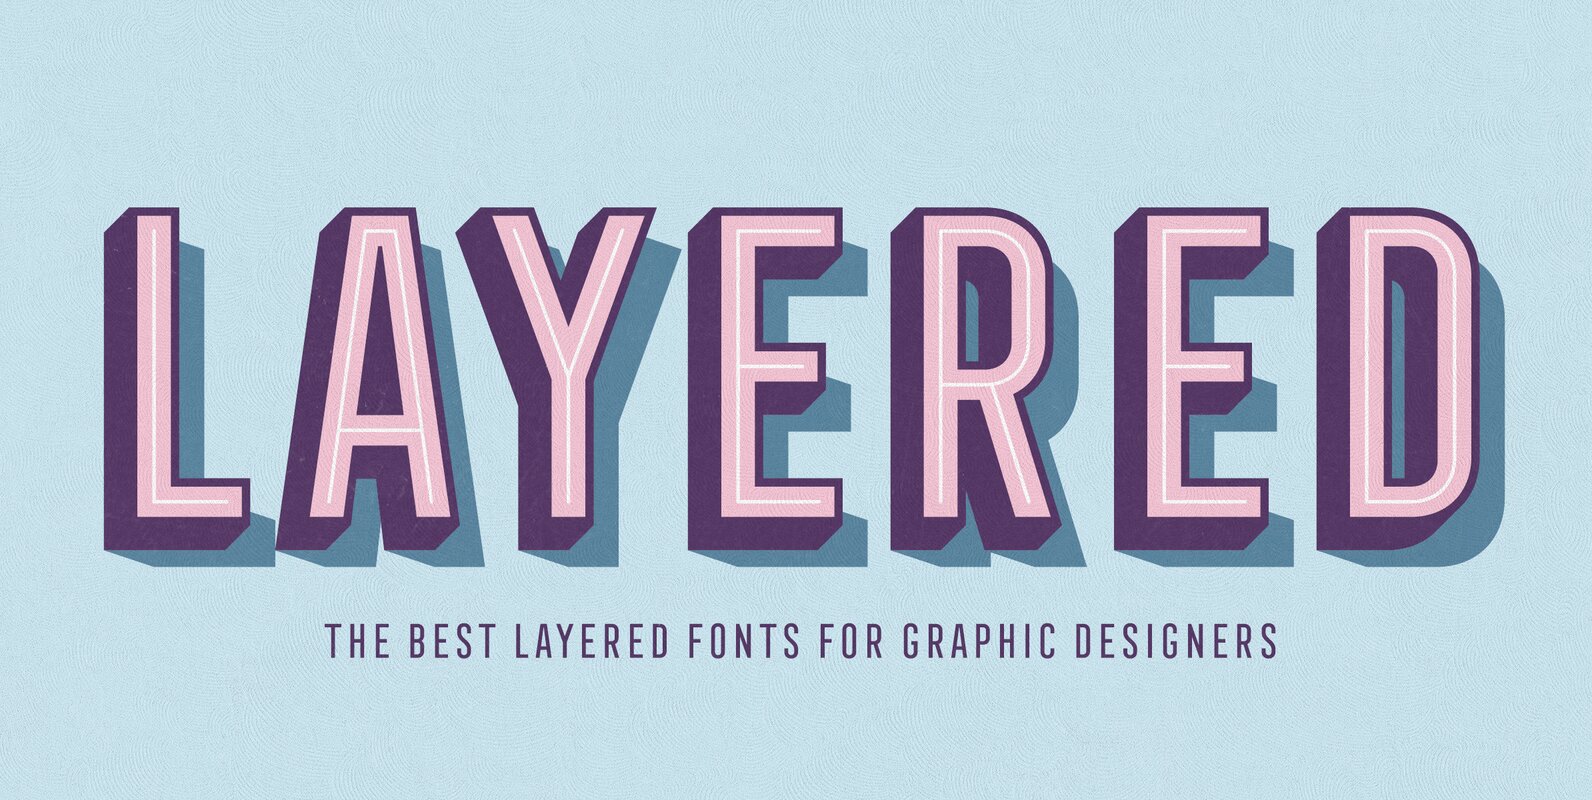 The Best Layered Fonts for Graphic Designers